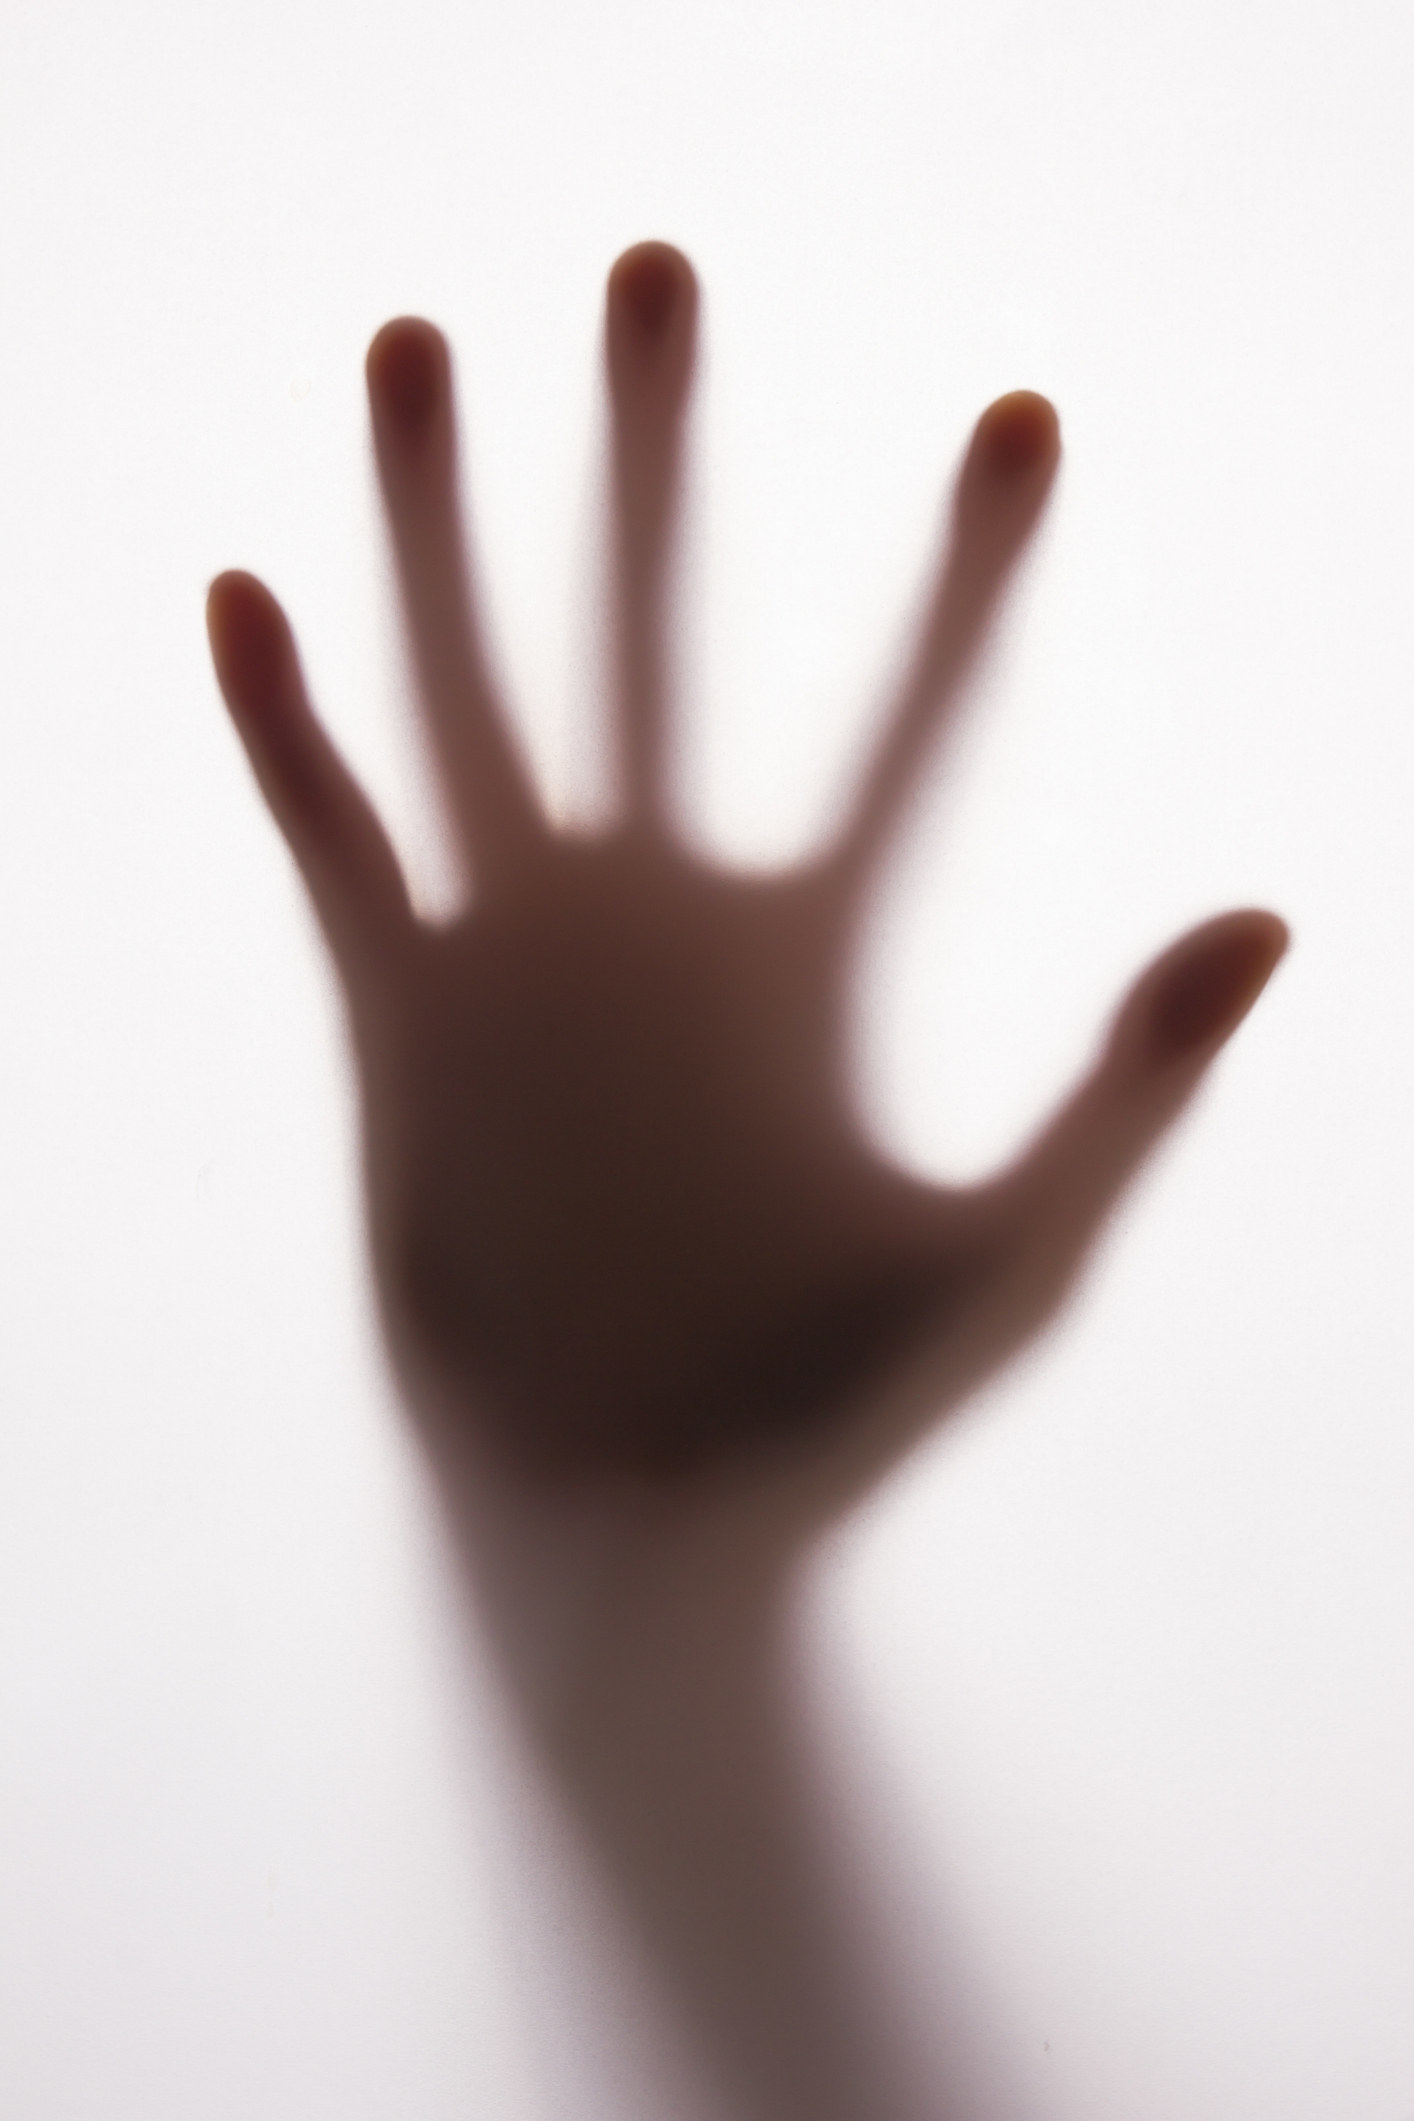 The silhouette of a hand